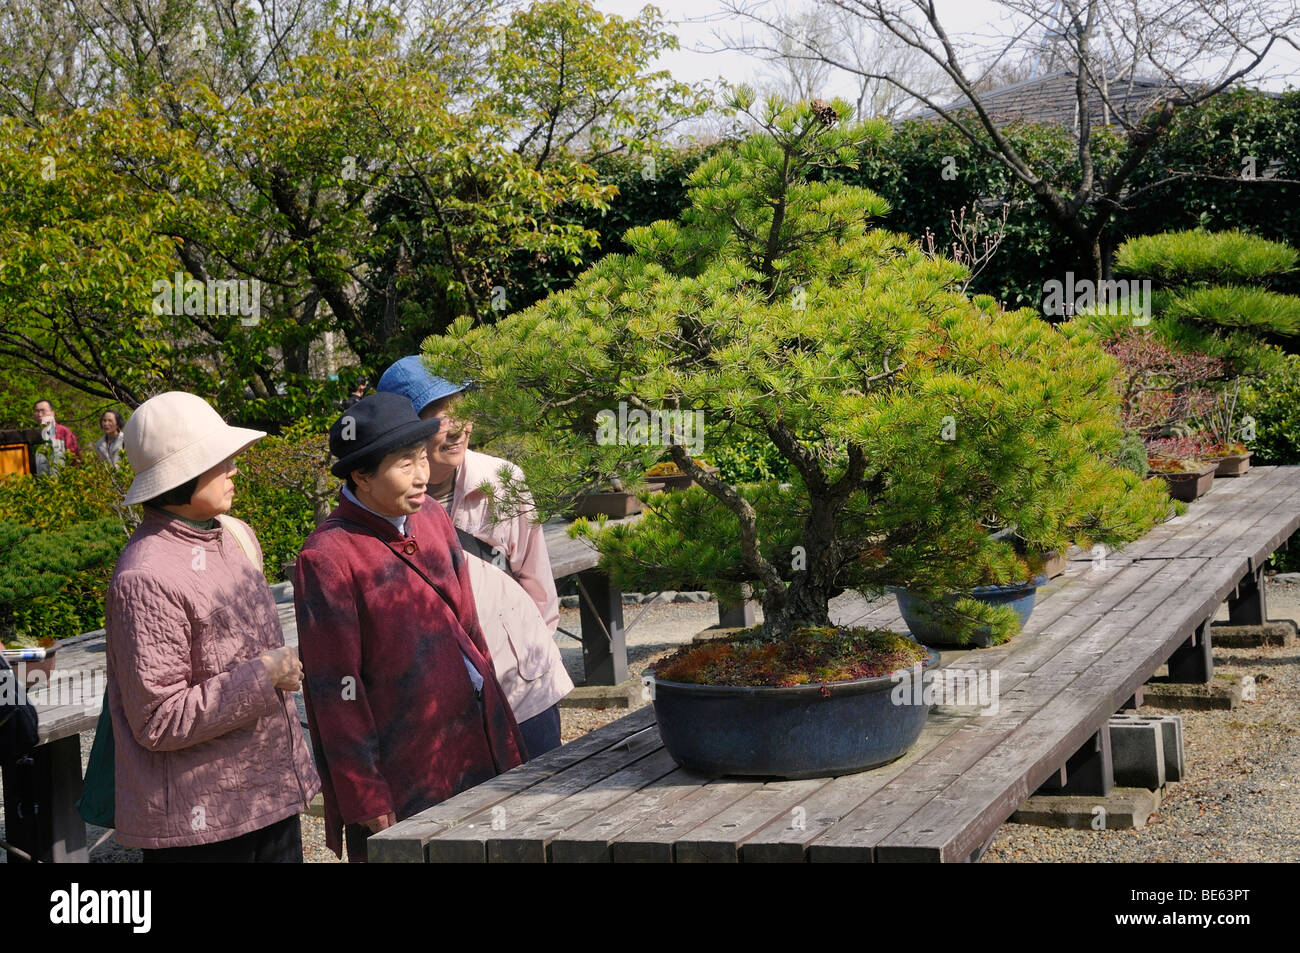 Old Japanese women inspecting a bonsai tree at the Botanical Garden in Kyoto, Japan, Asia Stock Photo